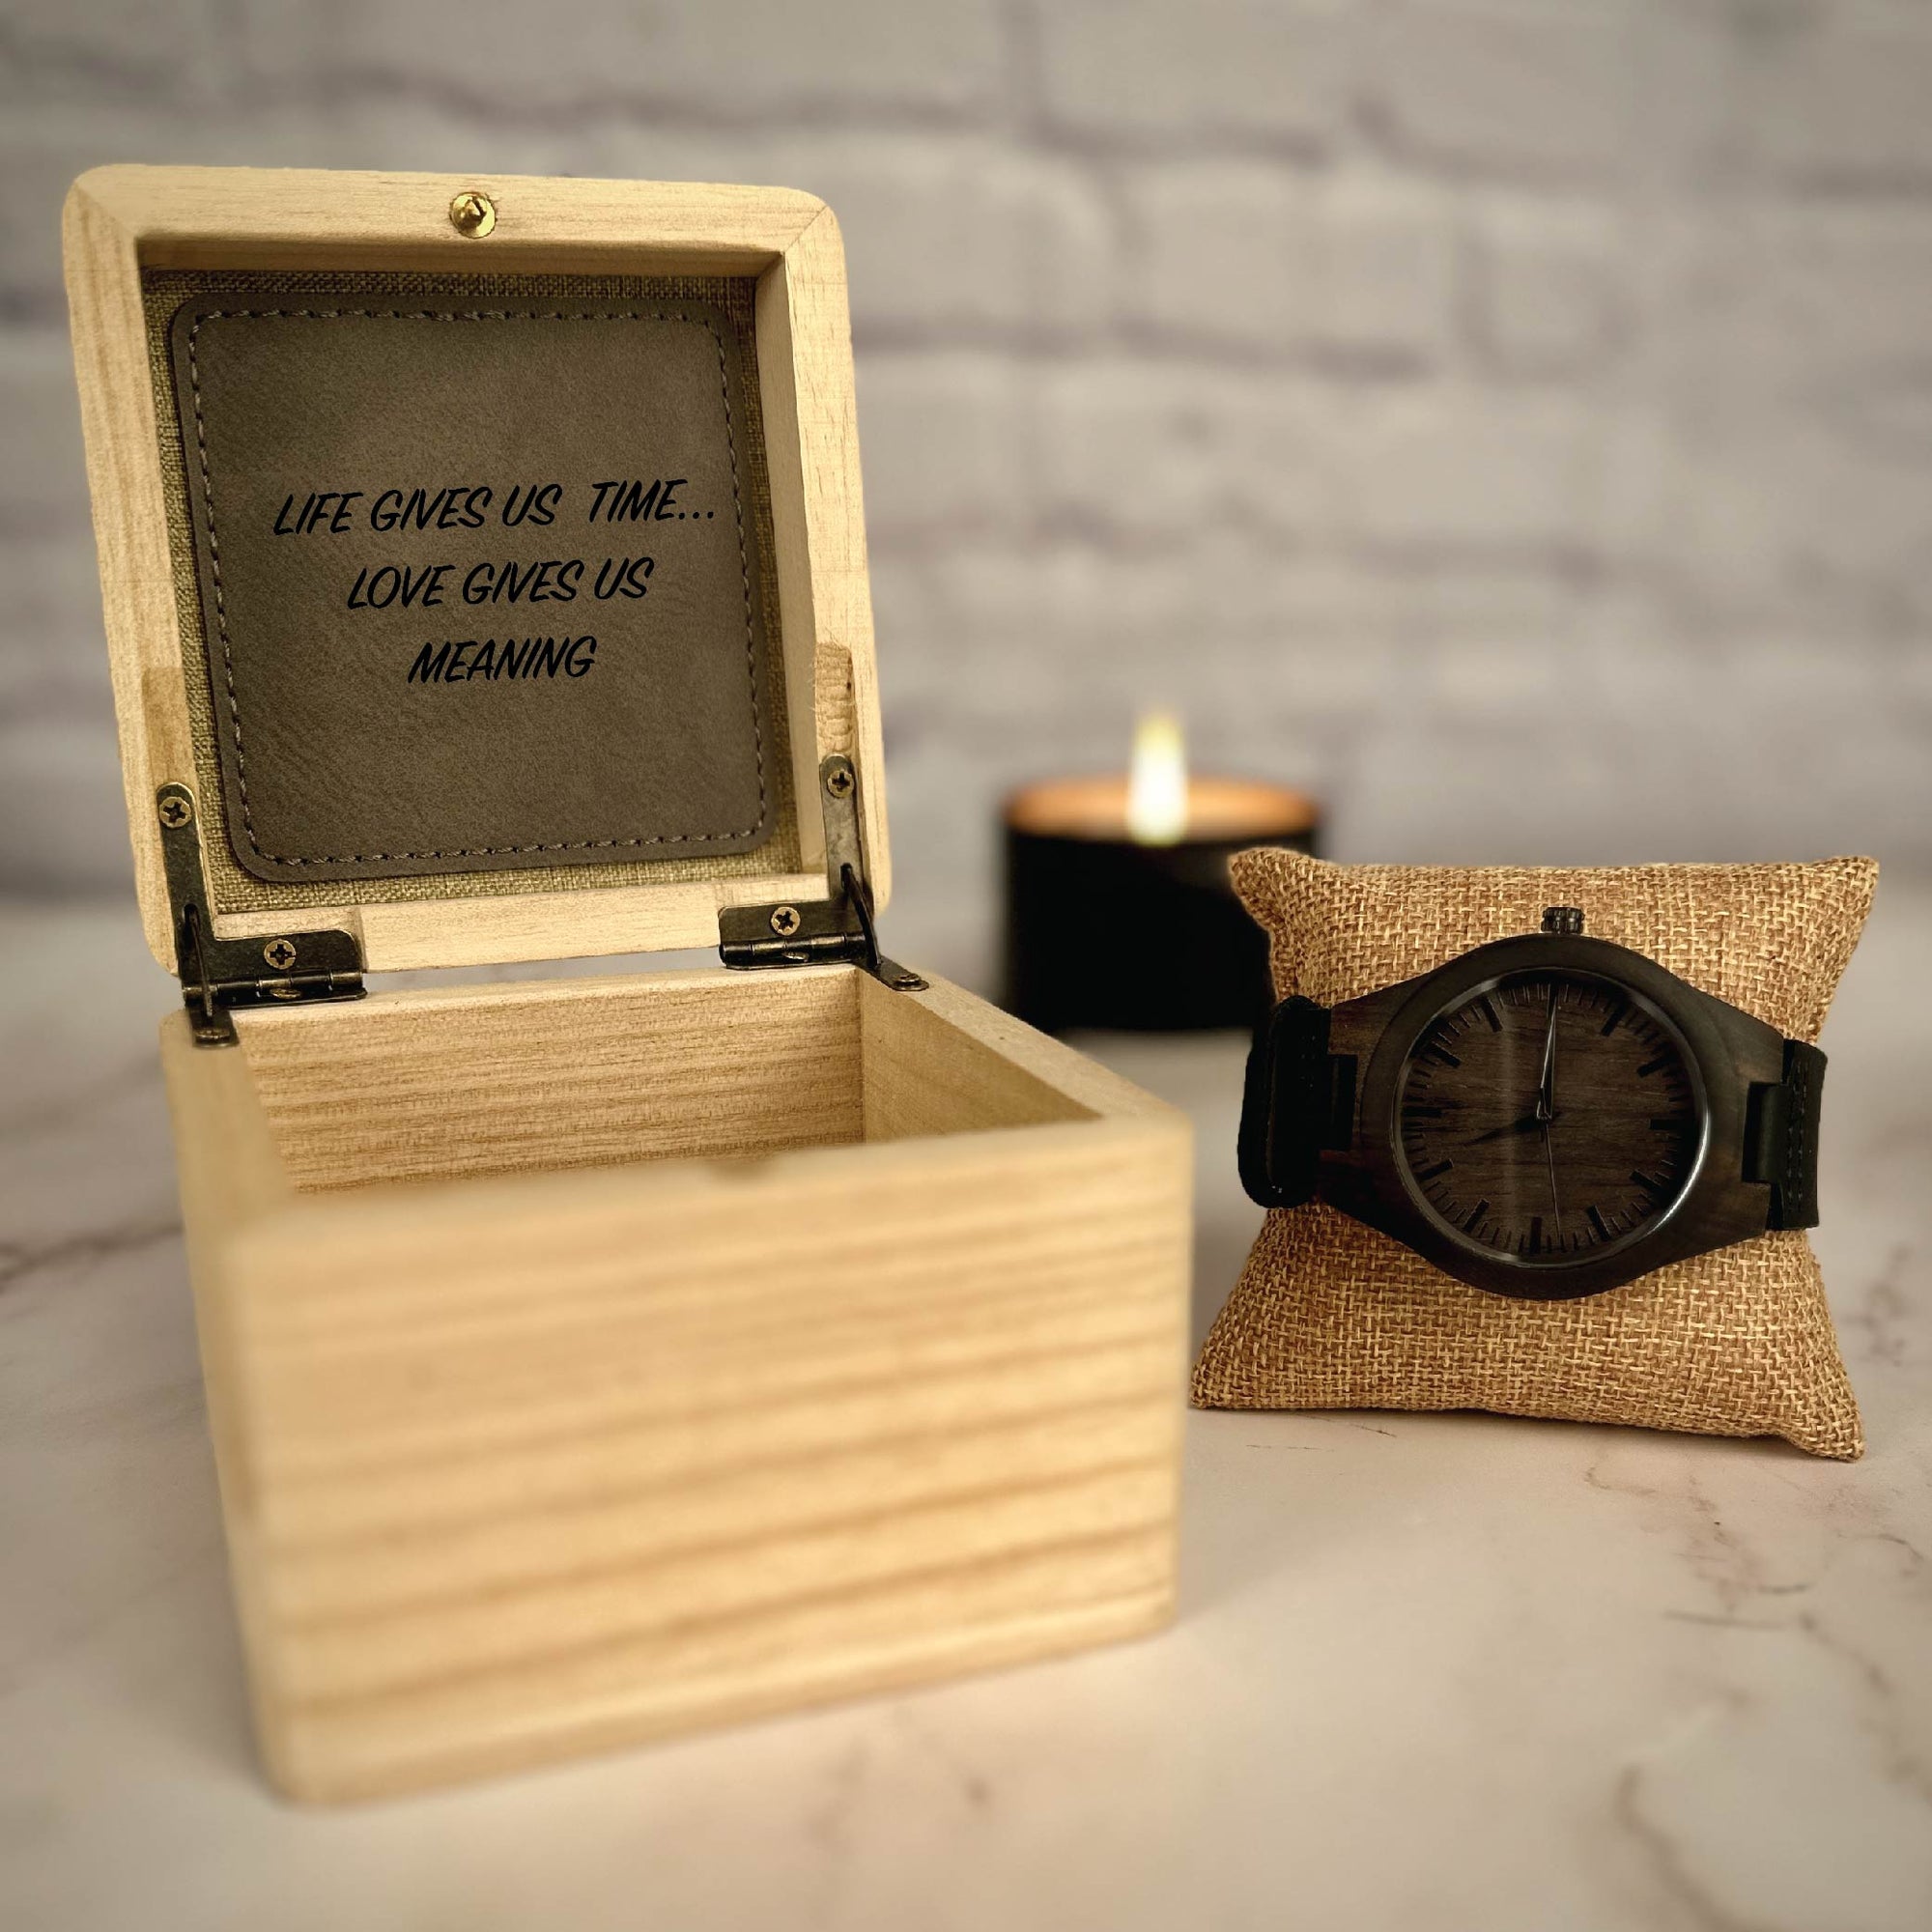 Sentimental Watch And Box